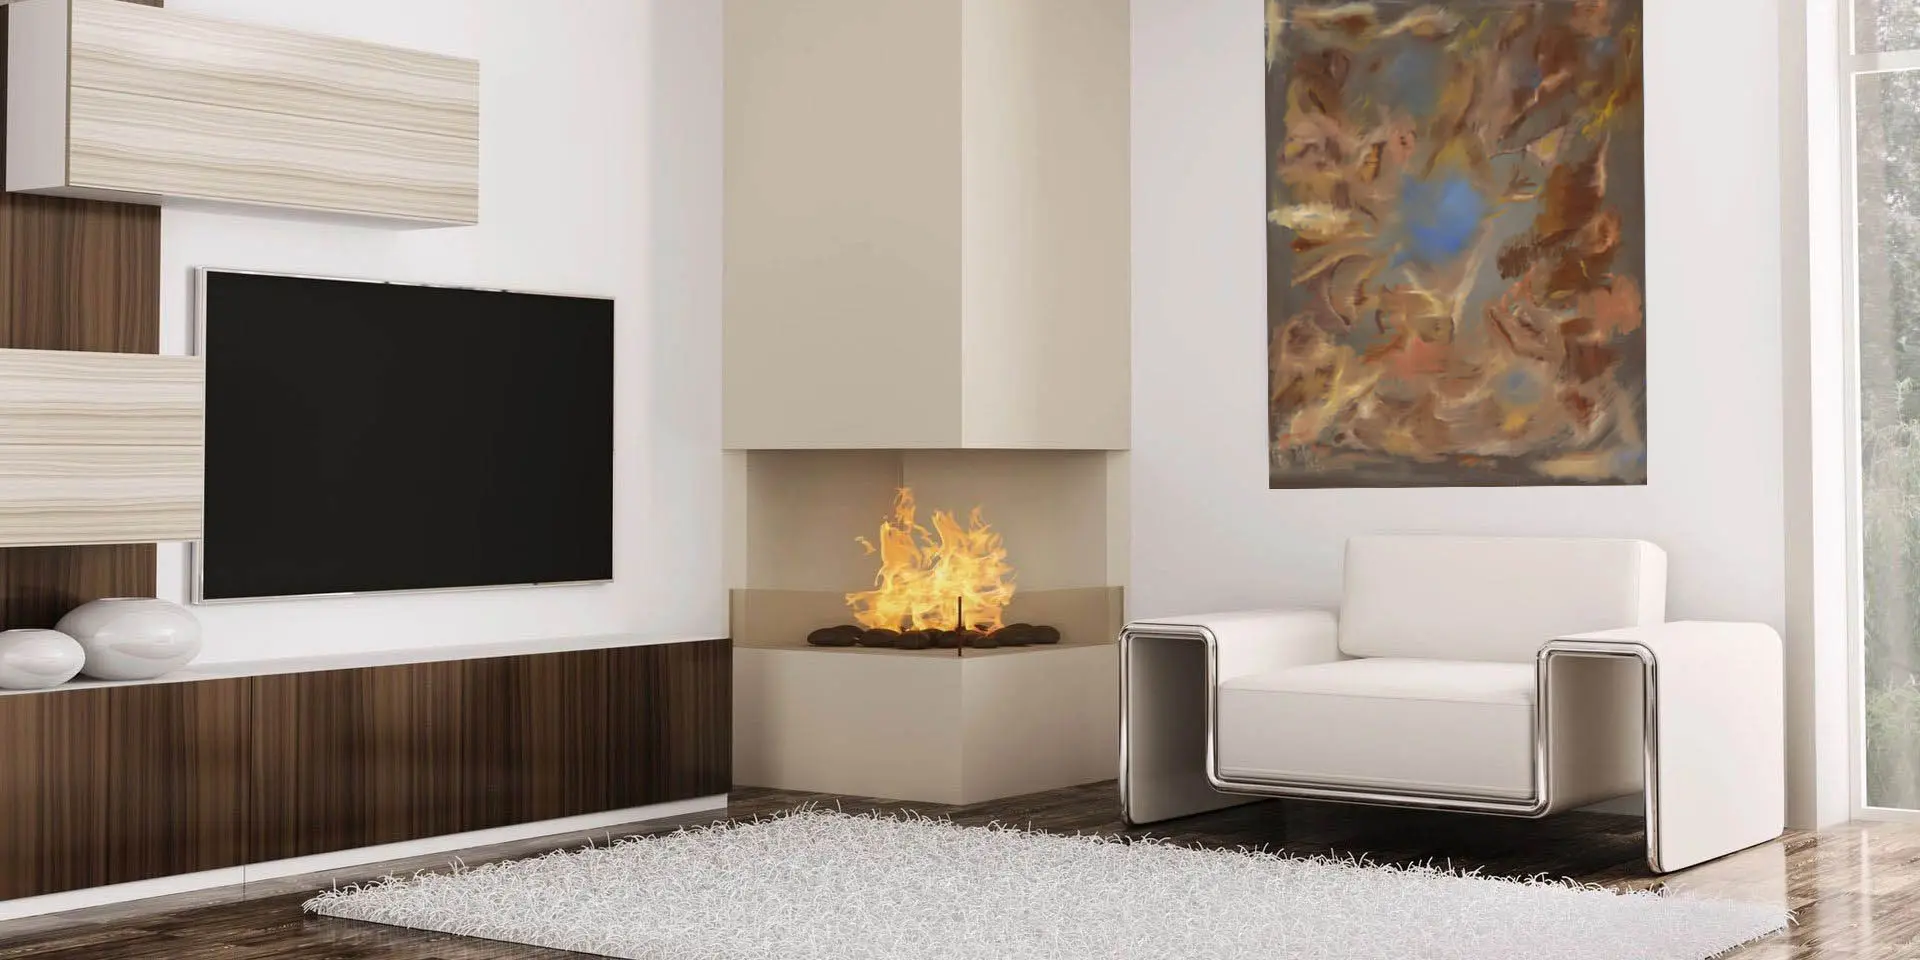 A corner fireplace in the center of a living room.